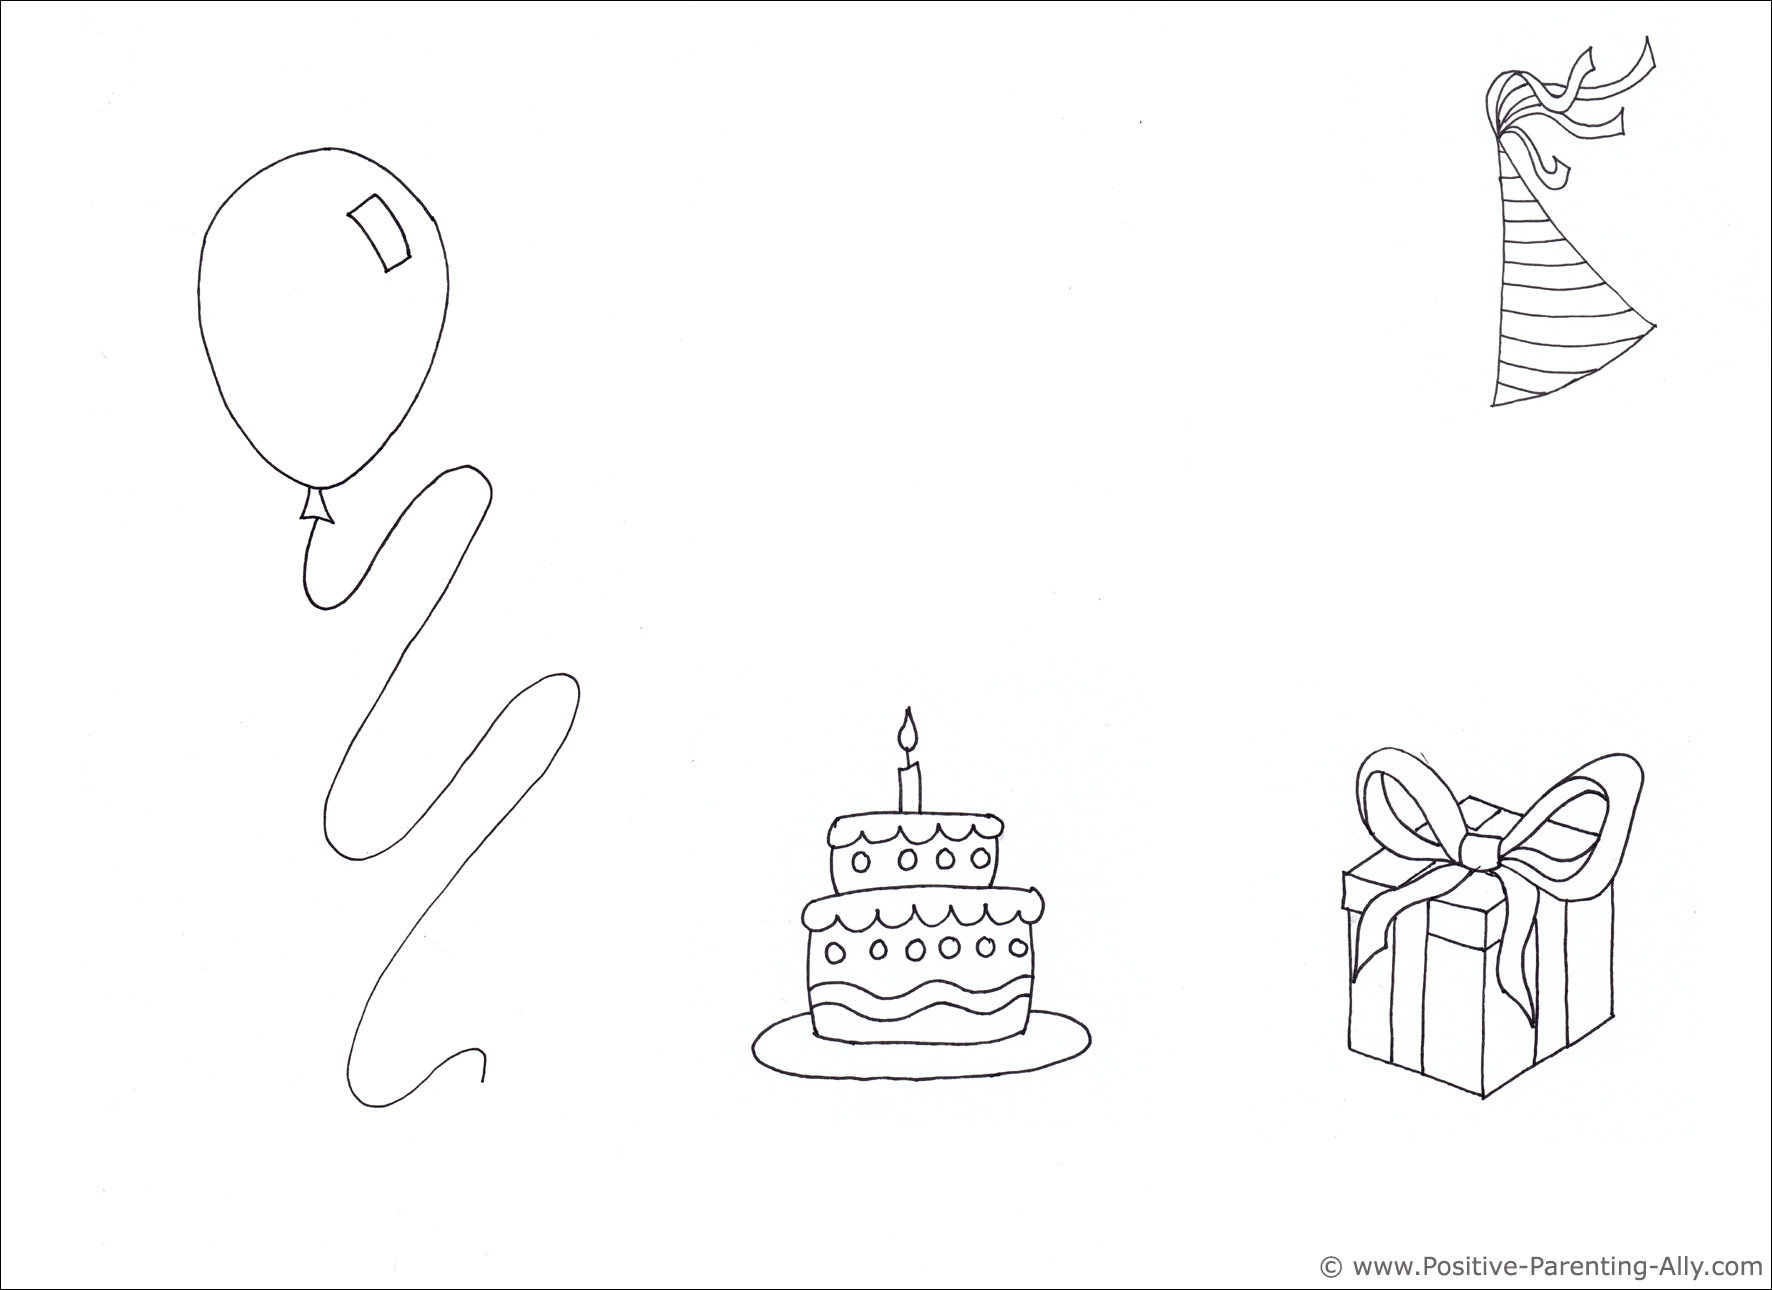 Example of birthday invitation drawing with plenty of white space.